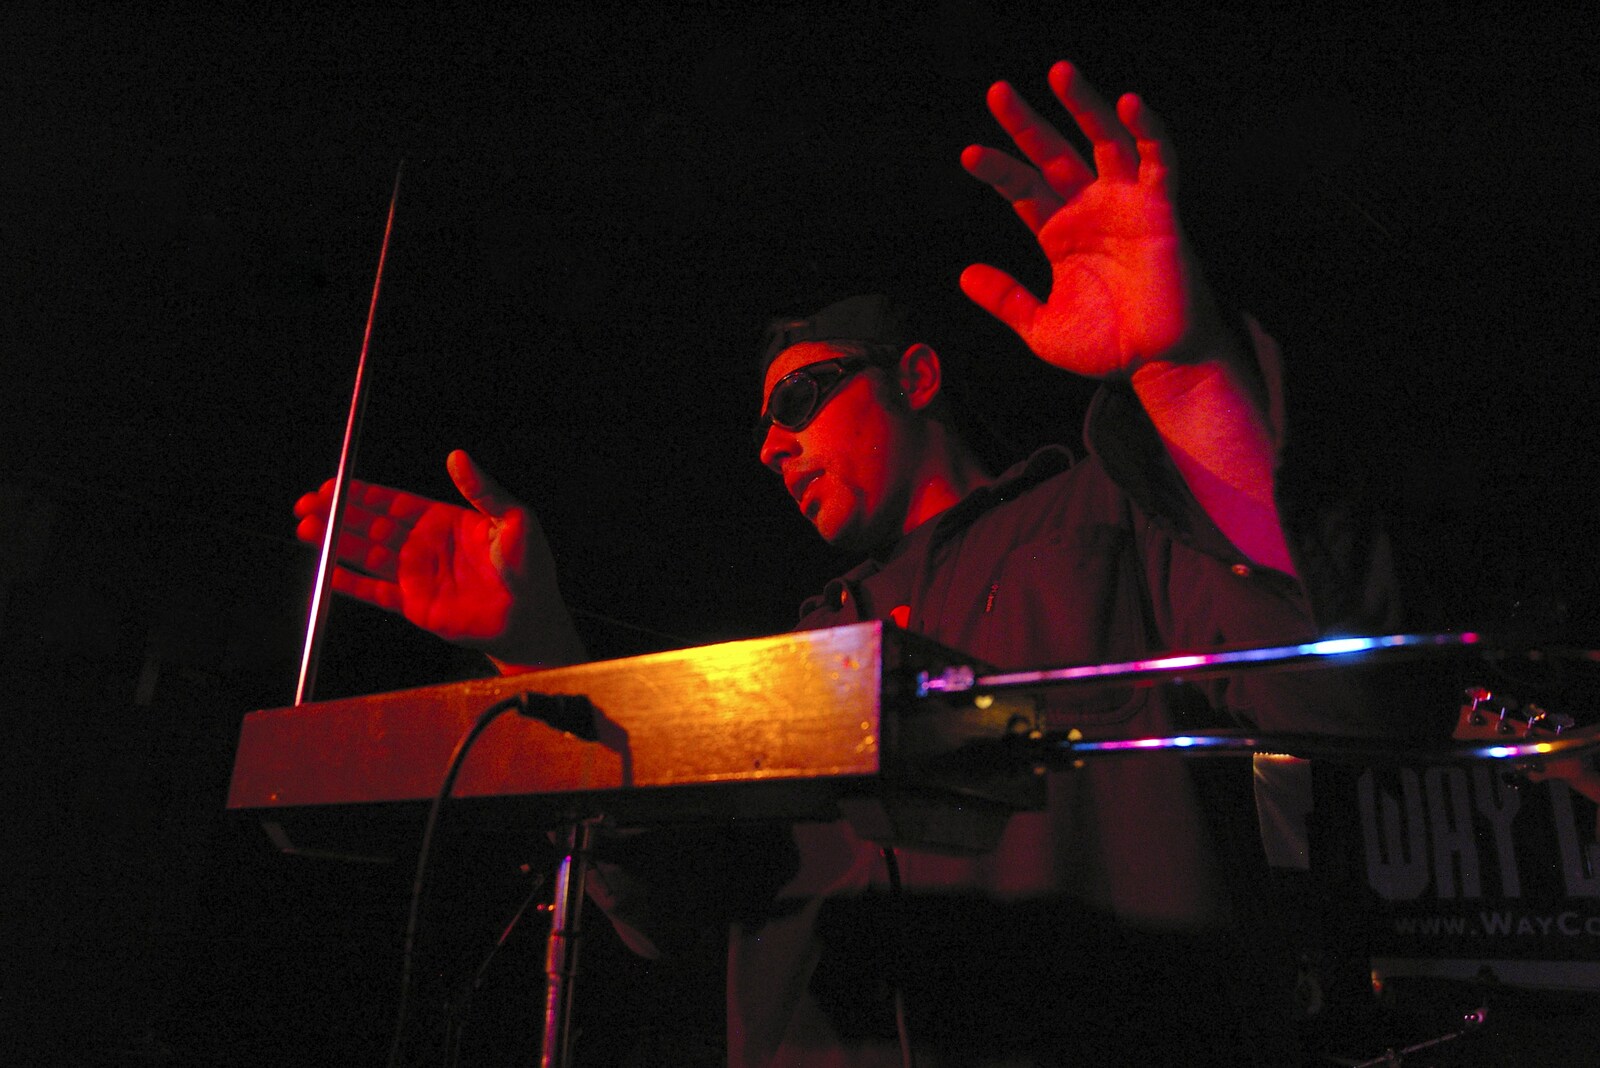 Impressive Theremin action from Cruisin' Route 101, San Diego to Capistrano, California - 4th March 2006